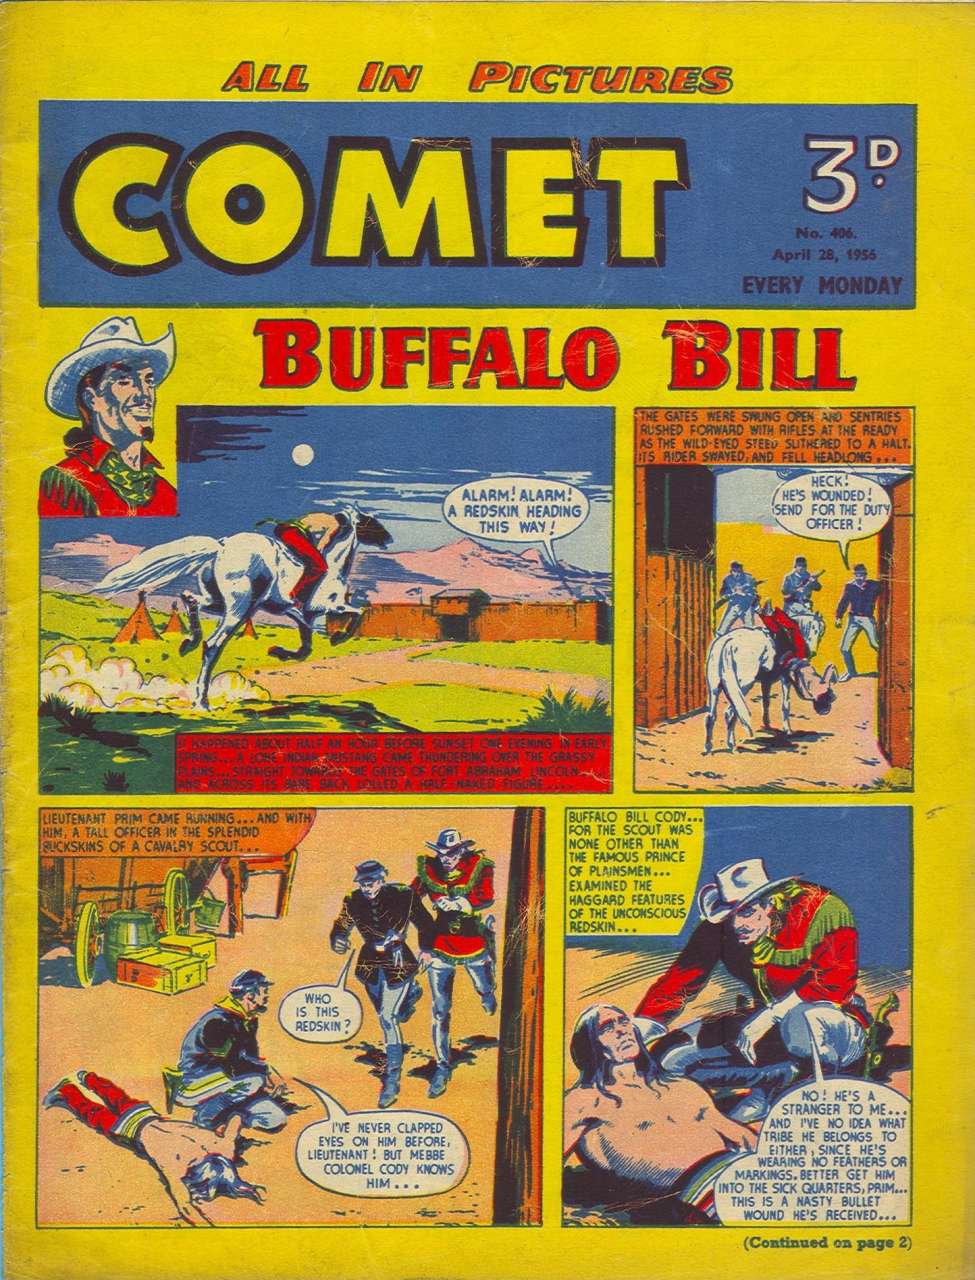 Book Cover For The Comet 406